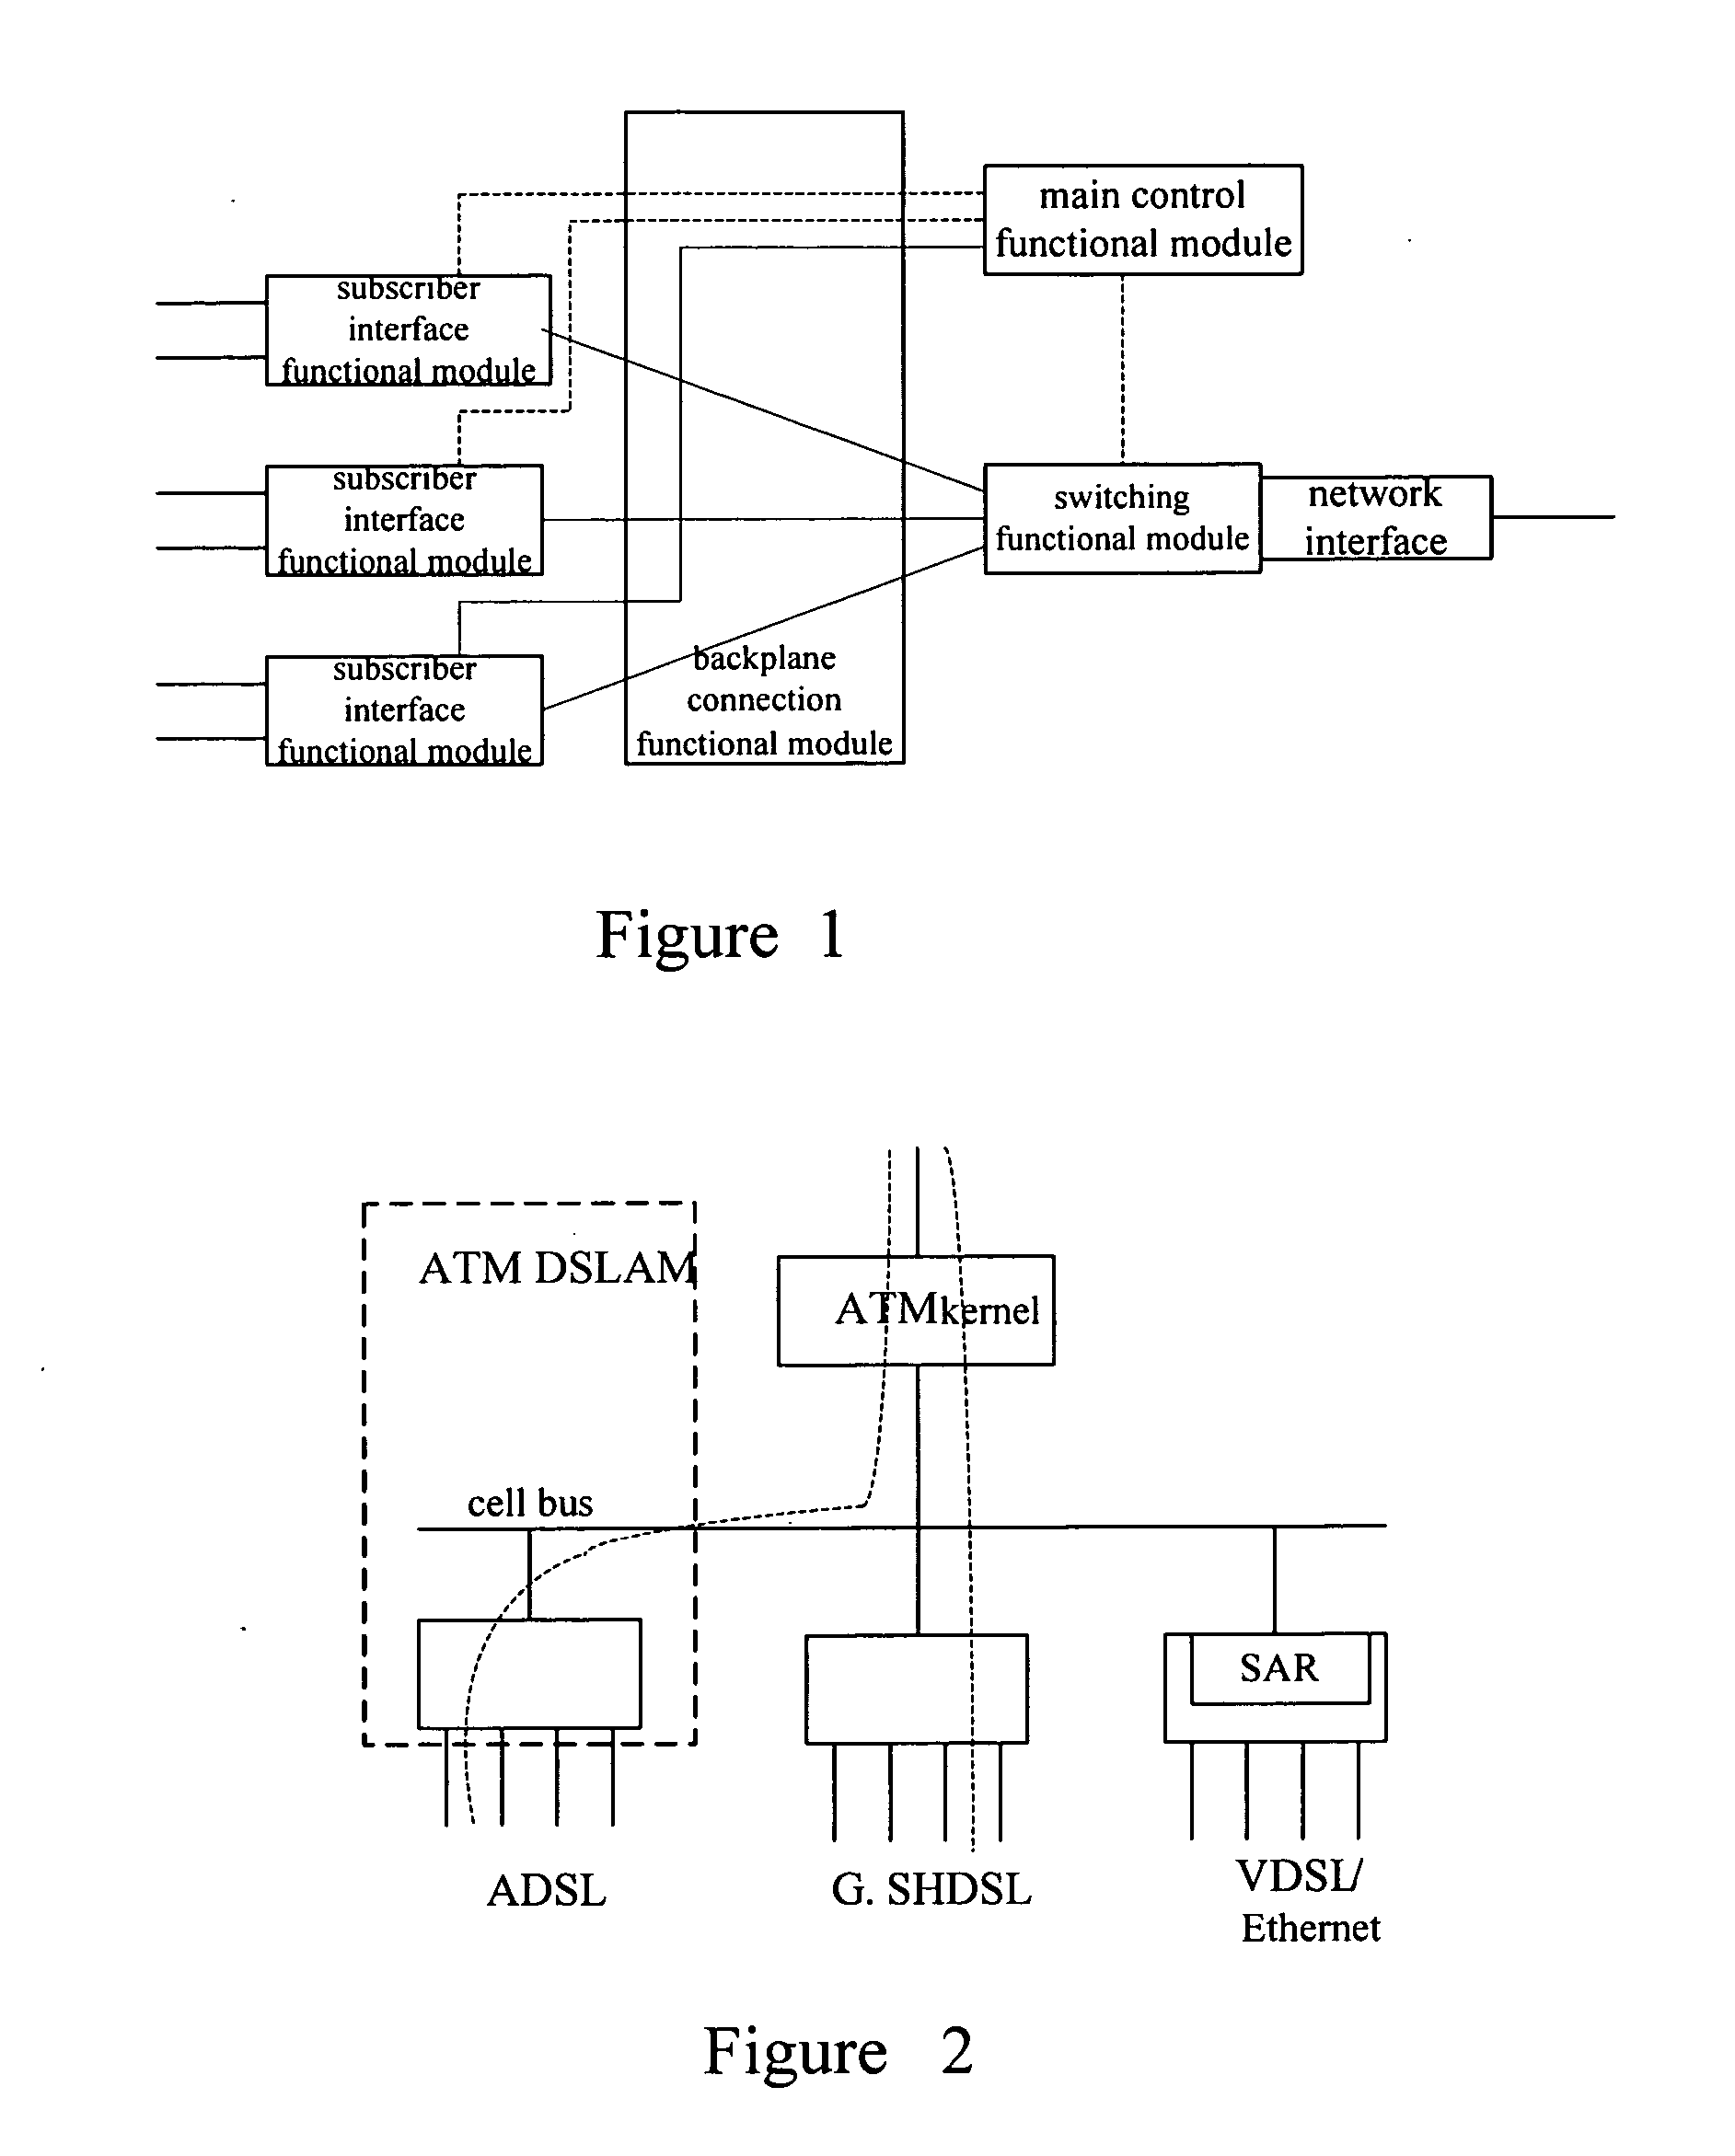 Access Device and Service Transmission Method